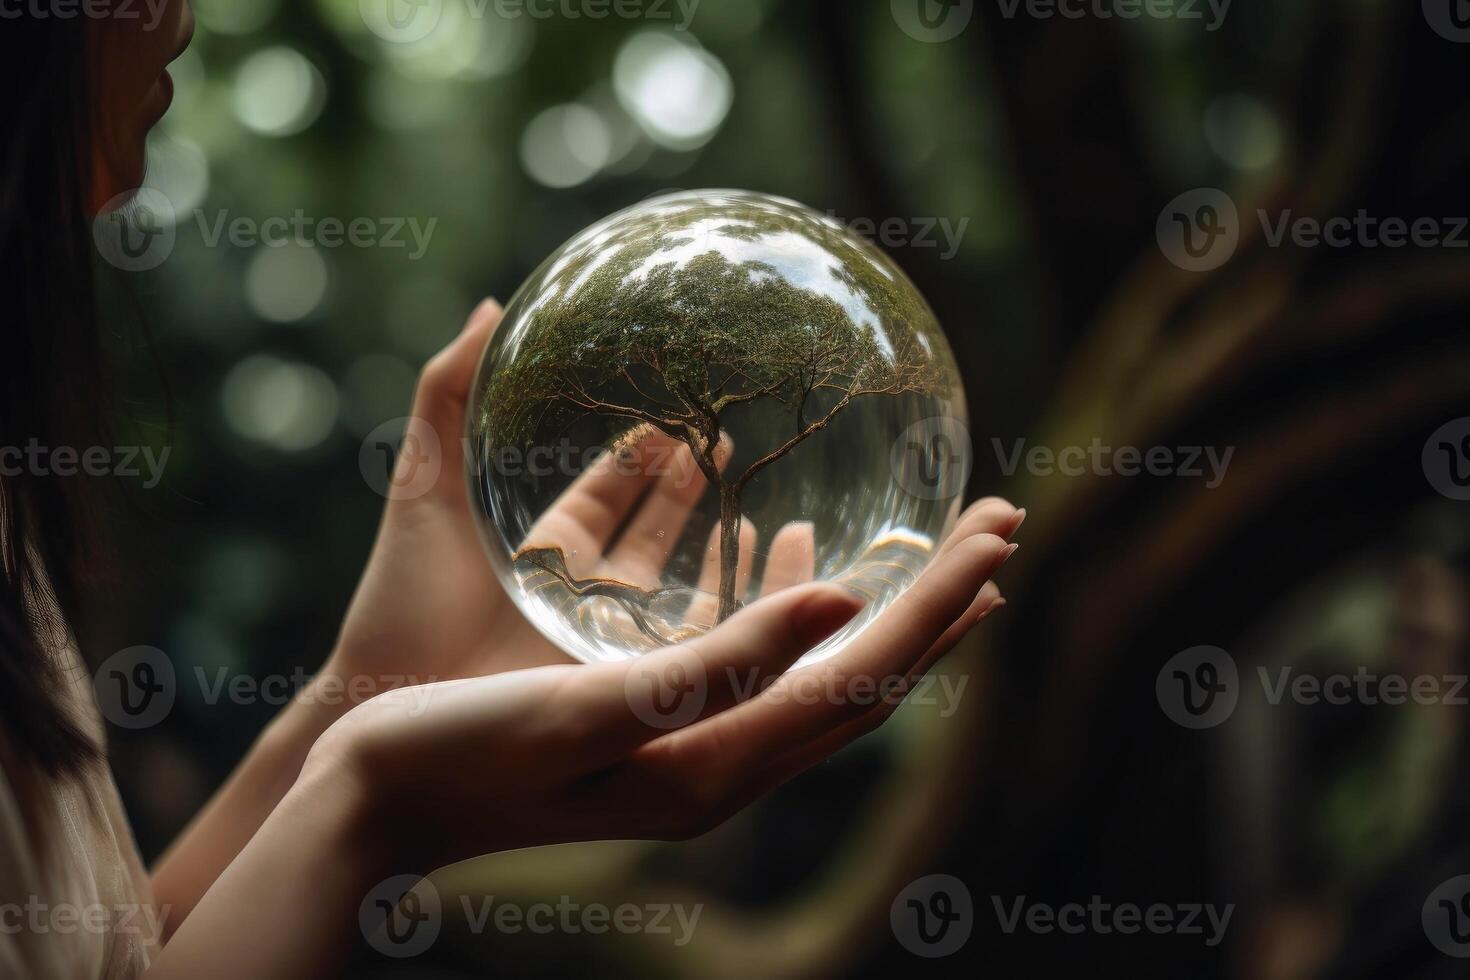 A tree inside of a glass sphere held by a female hand created with technology photo